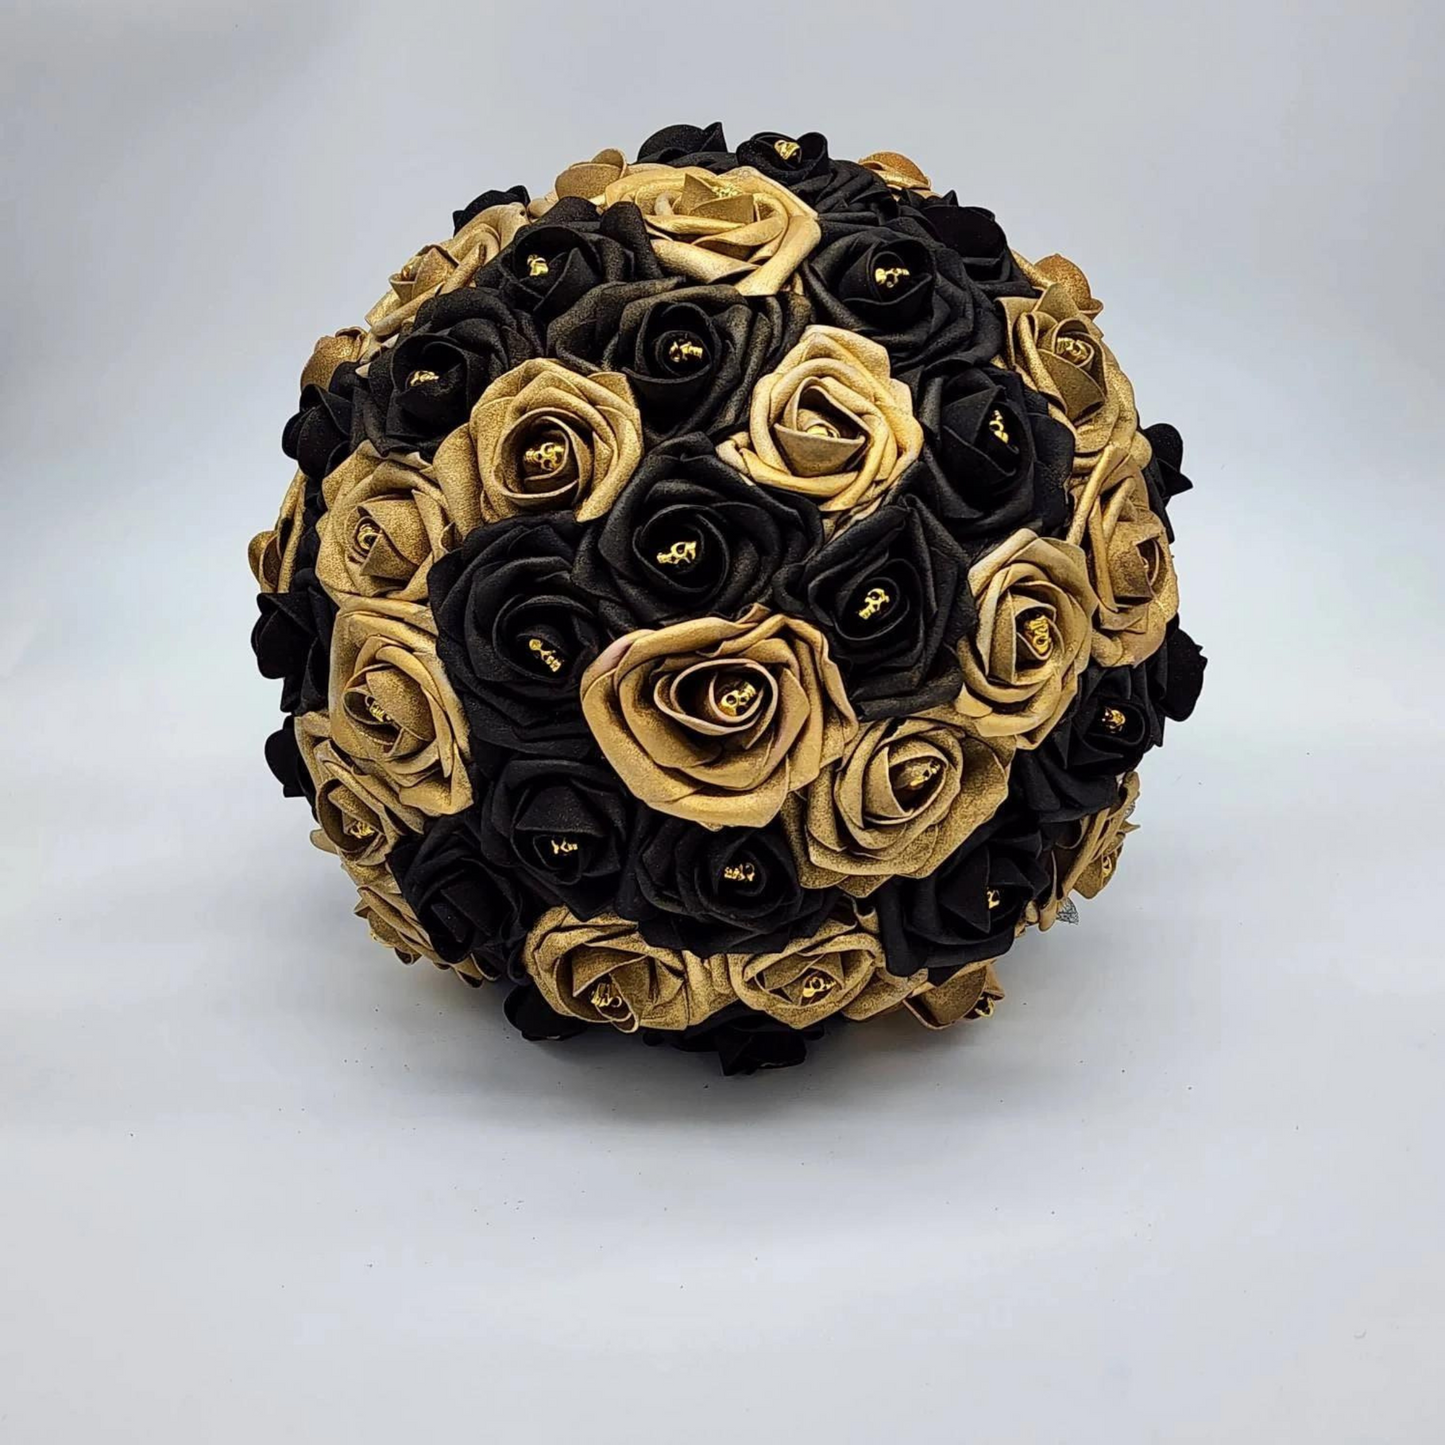 Gothic Skull Black and Gold Bridal Bouquet